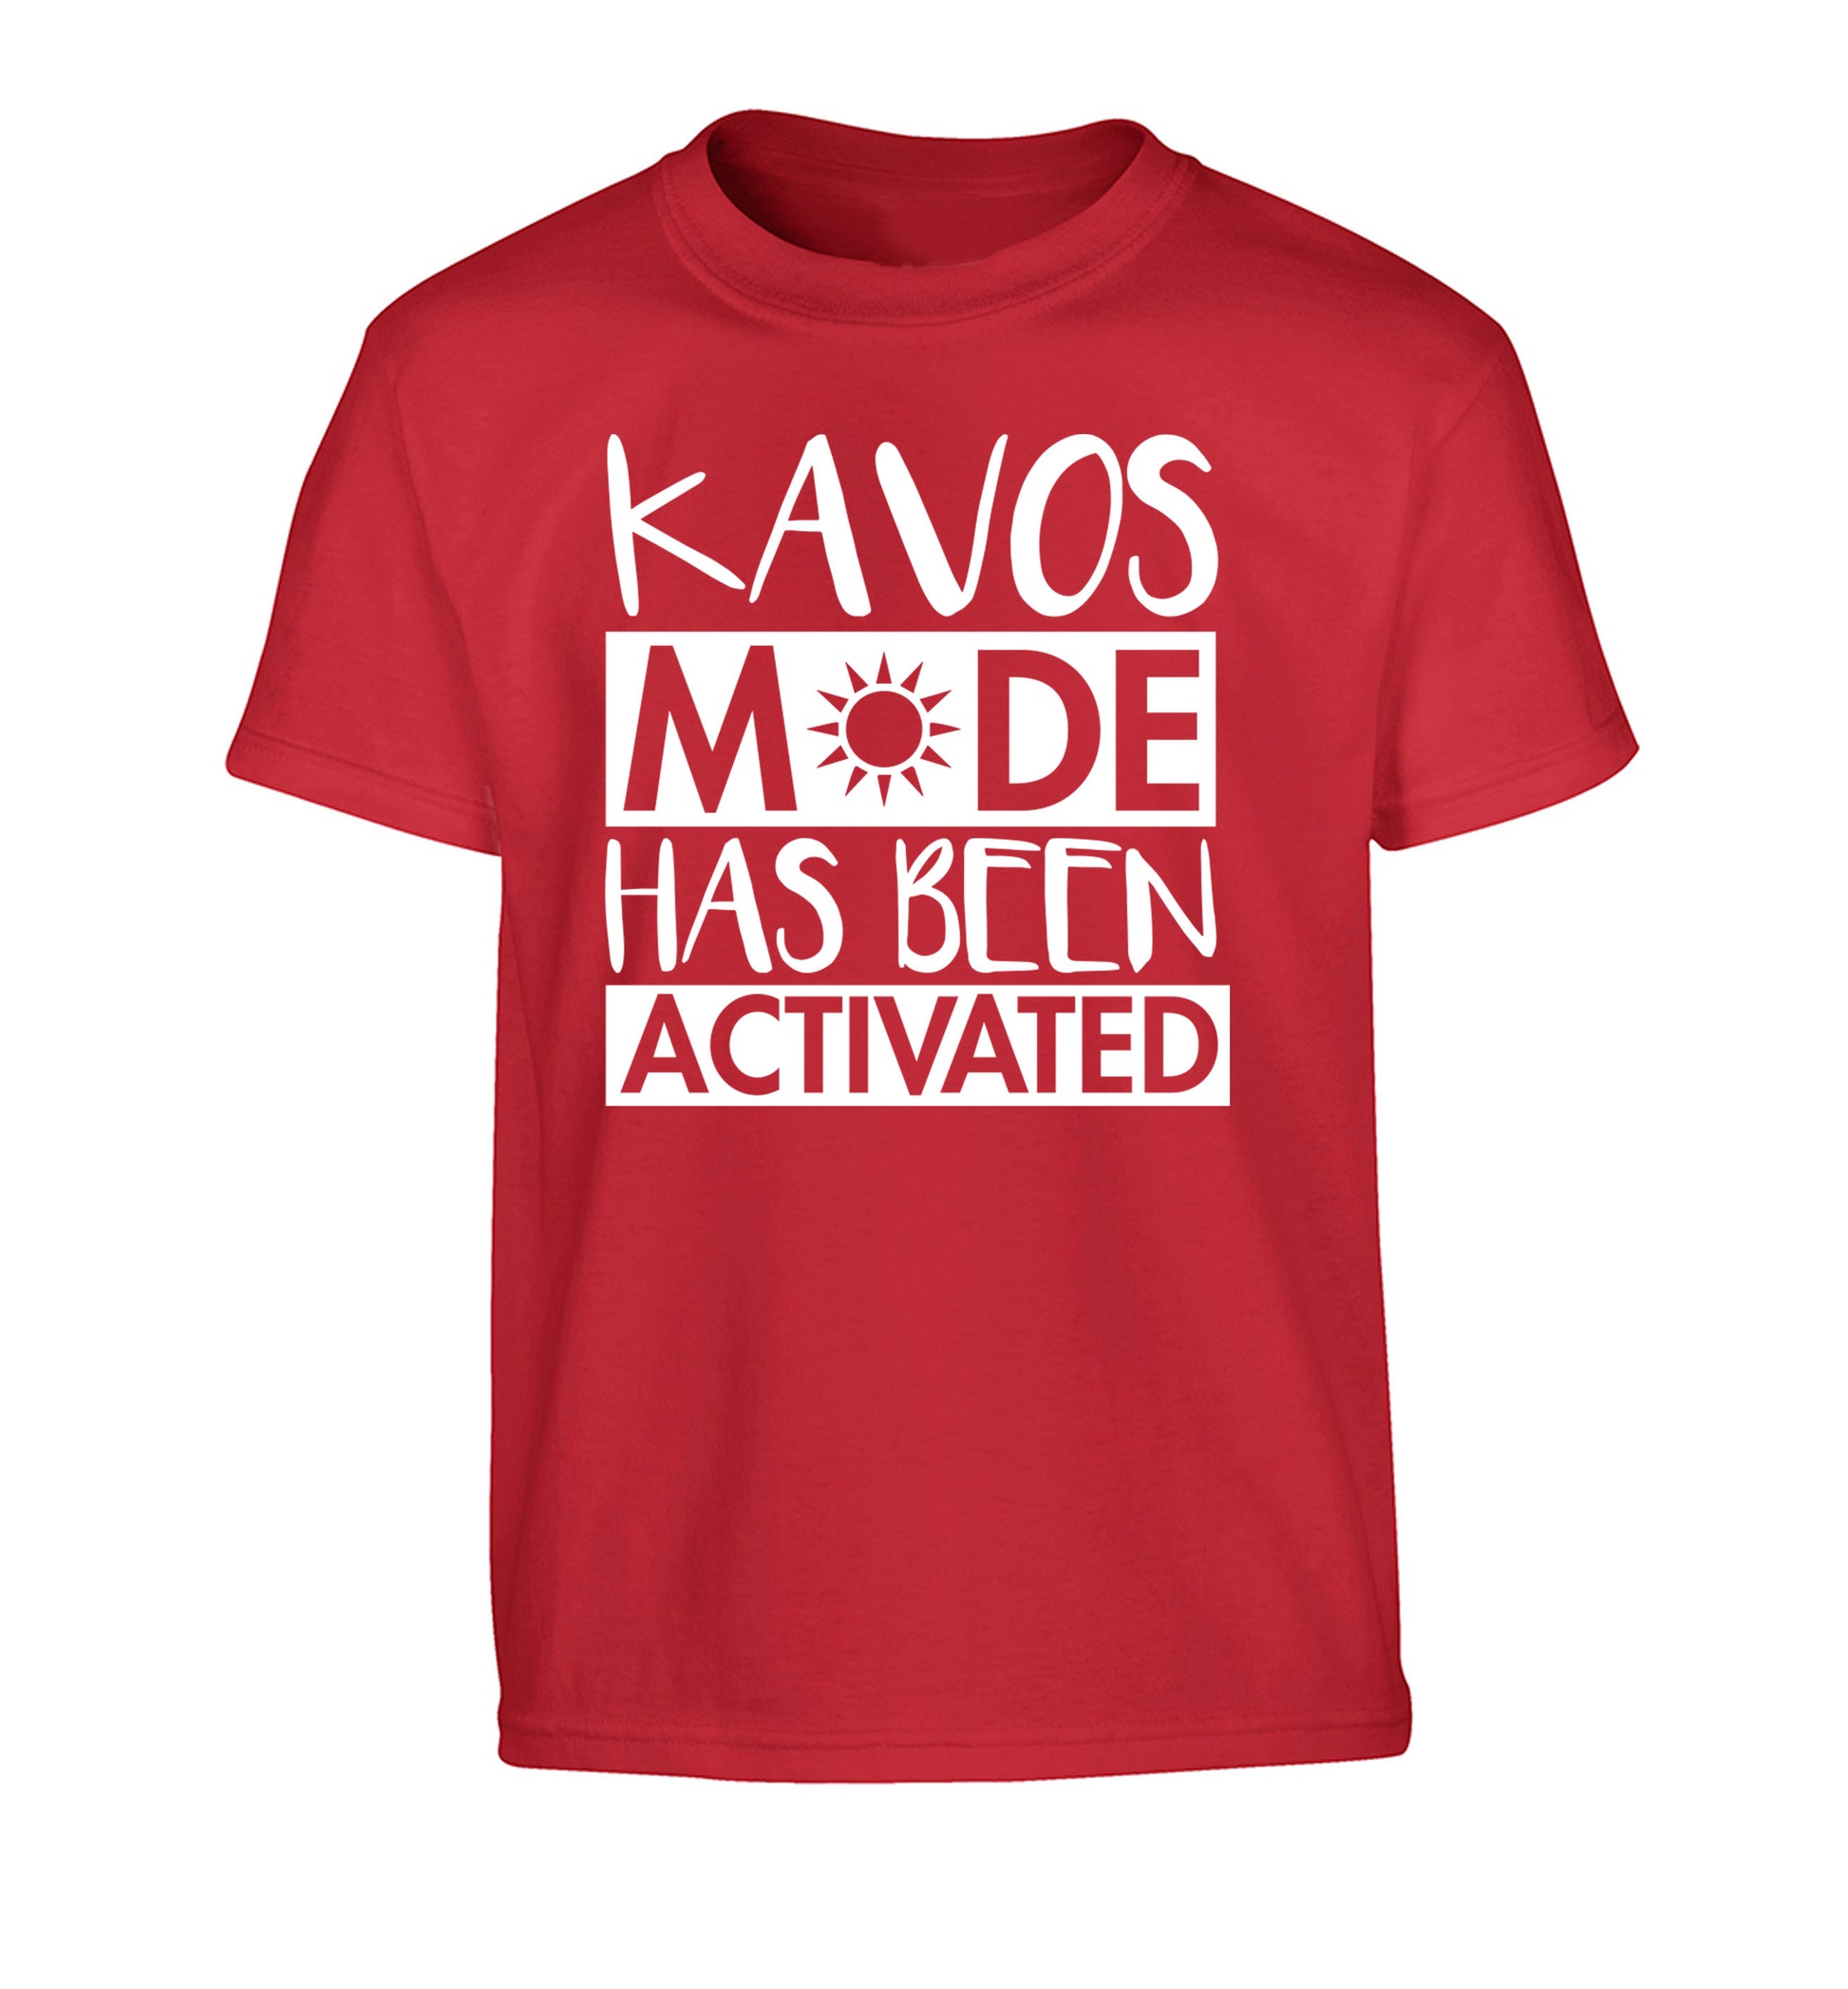 Kavos mode has been activated Children's red Tshirt 12-14 Years